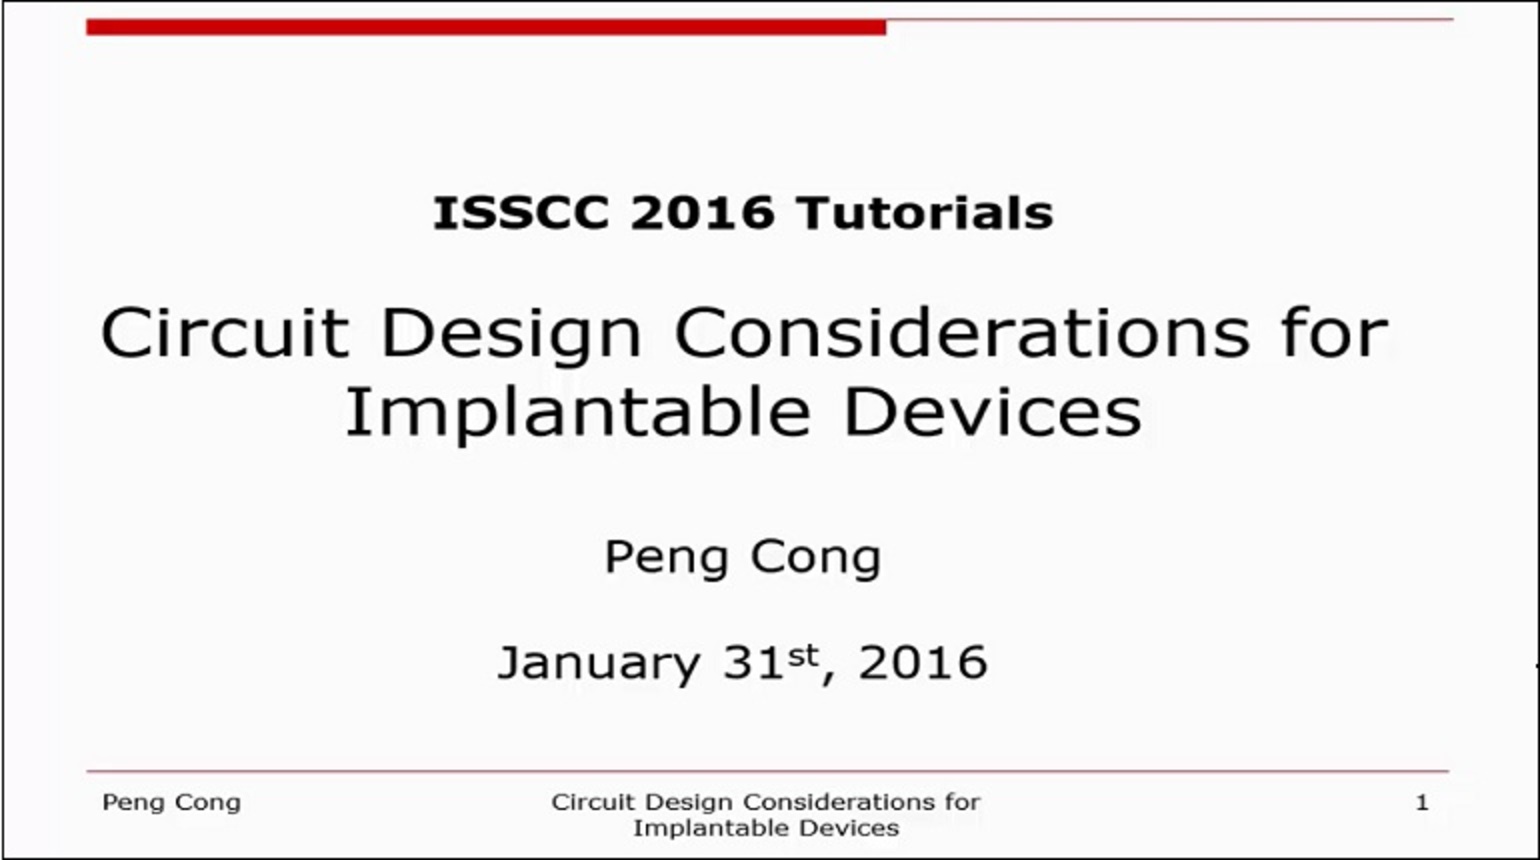 Circuit Design Considerations for Implantable Devices Video